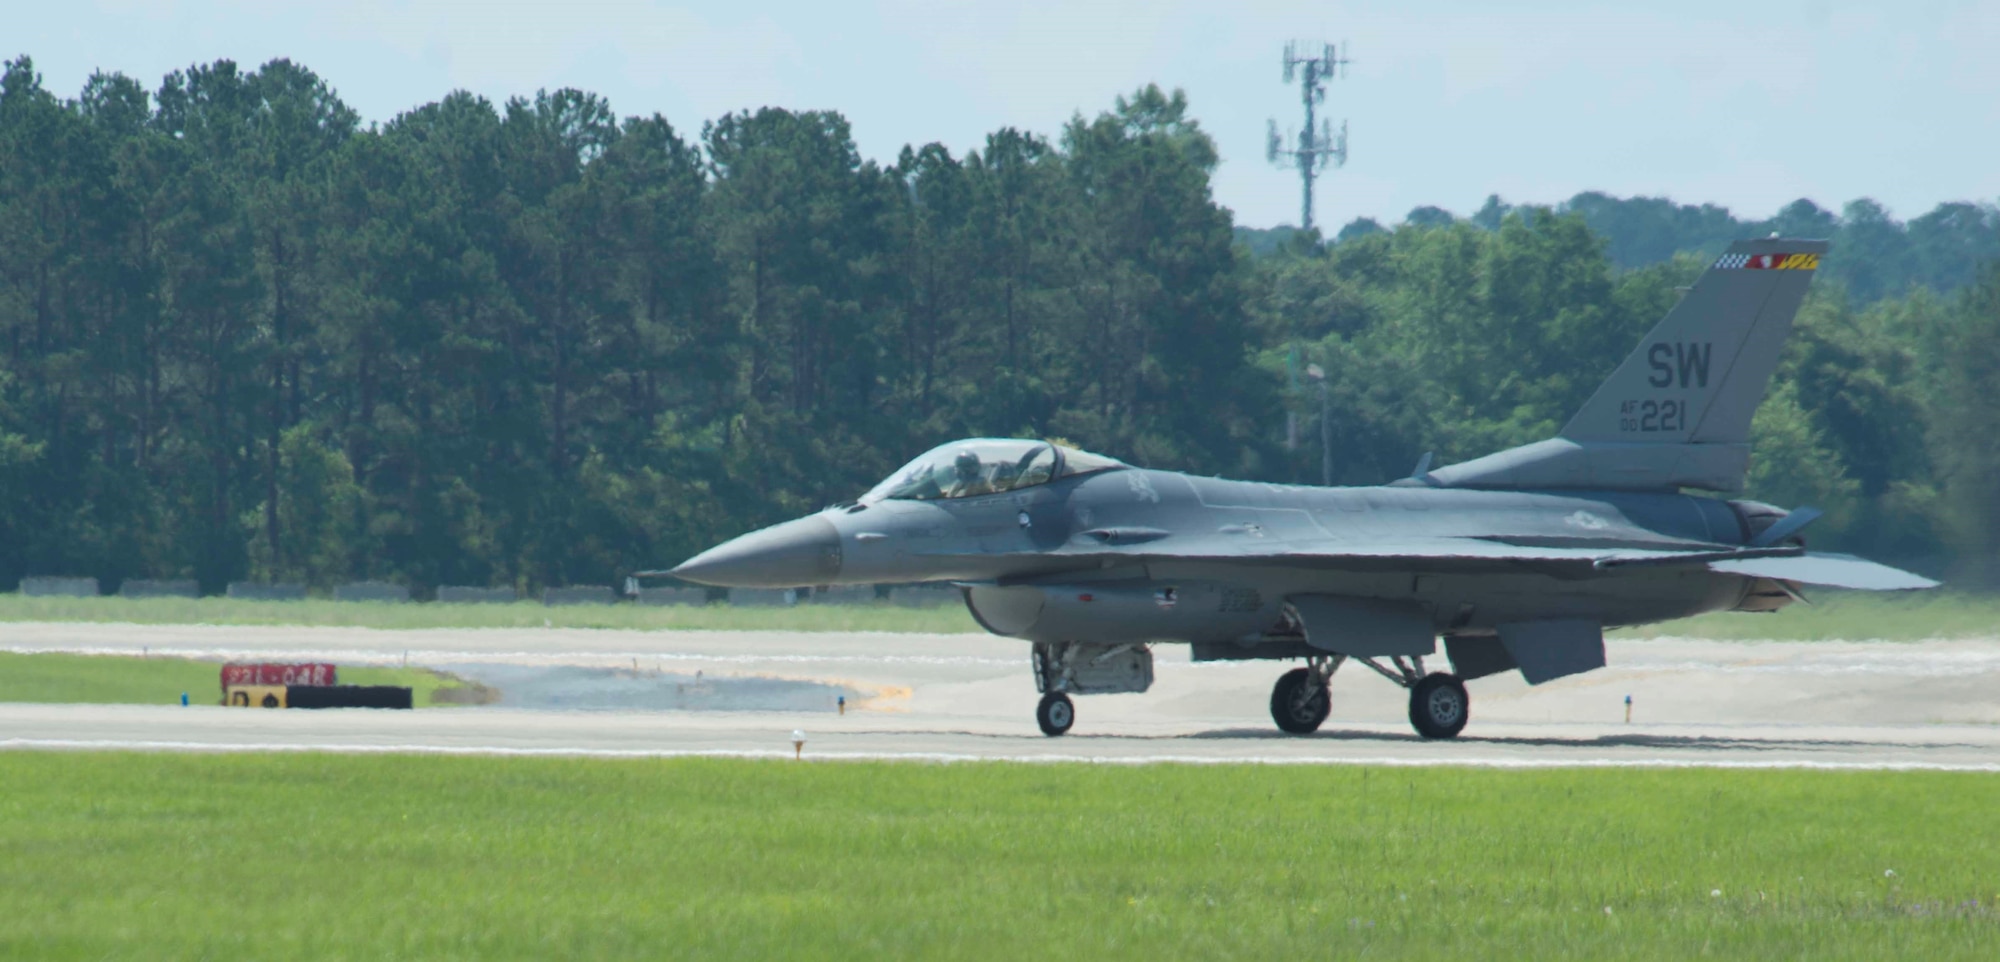 U.S. Air Force Maj. John Waters, Air Combat Command Viper Demonstration Team commander and pilot, taxis an F-16CM Fighting Falcon at Shaw Air Force Base, S.C., June 9, 2018.